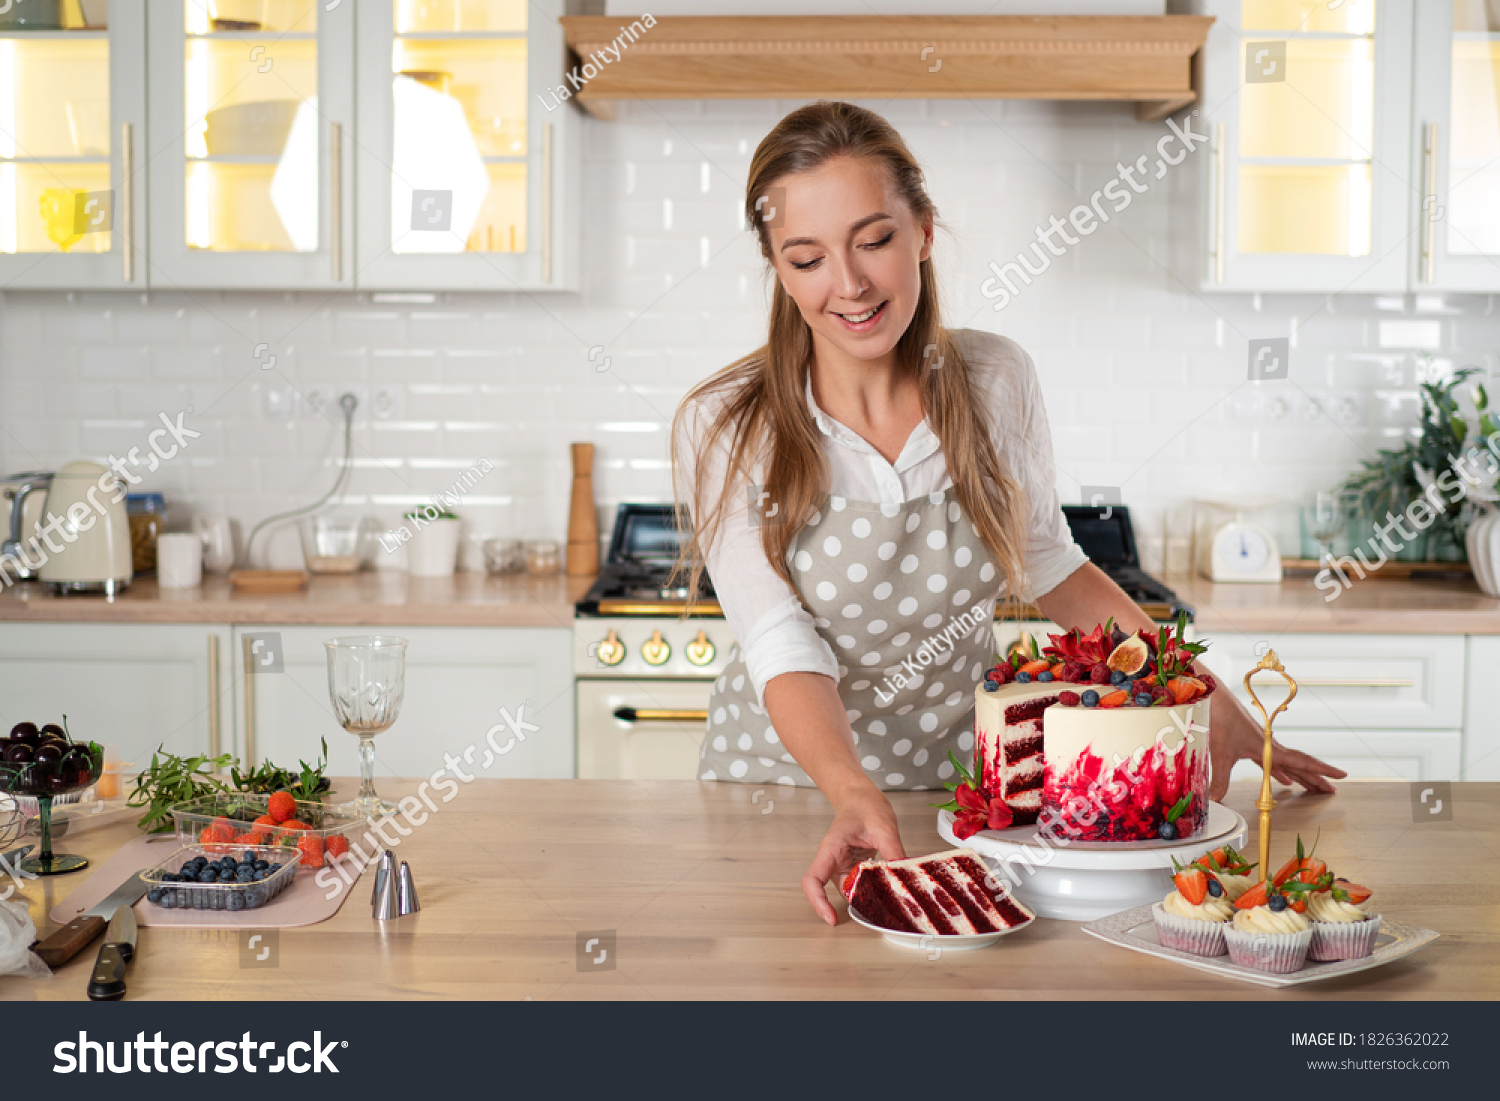 pastry chef in the kitchen makes desserts, cakes and muffins. Cooking at home. Delicious and beautiful homemade cakes, pastry recipes. A young woman in an apron in the kitchen made a red velvet cake #1826362022